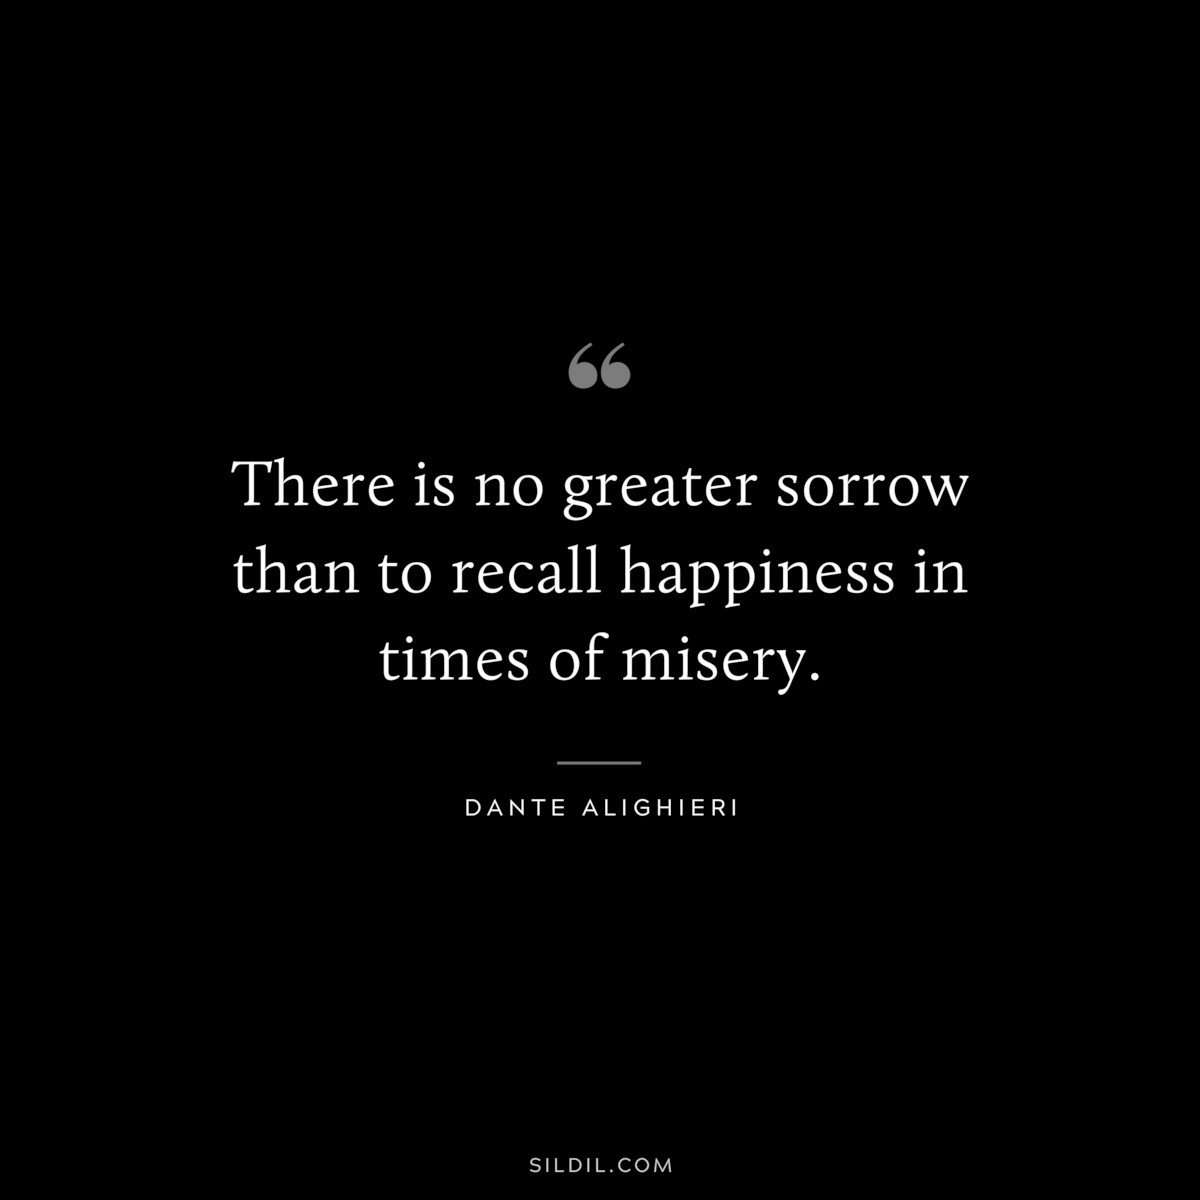 There is no greater sorrow than to recall happiness in times of misery. ― Dante Alighieri